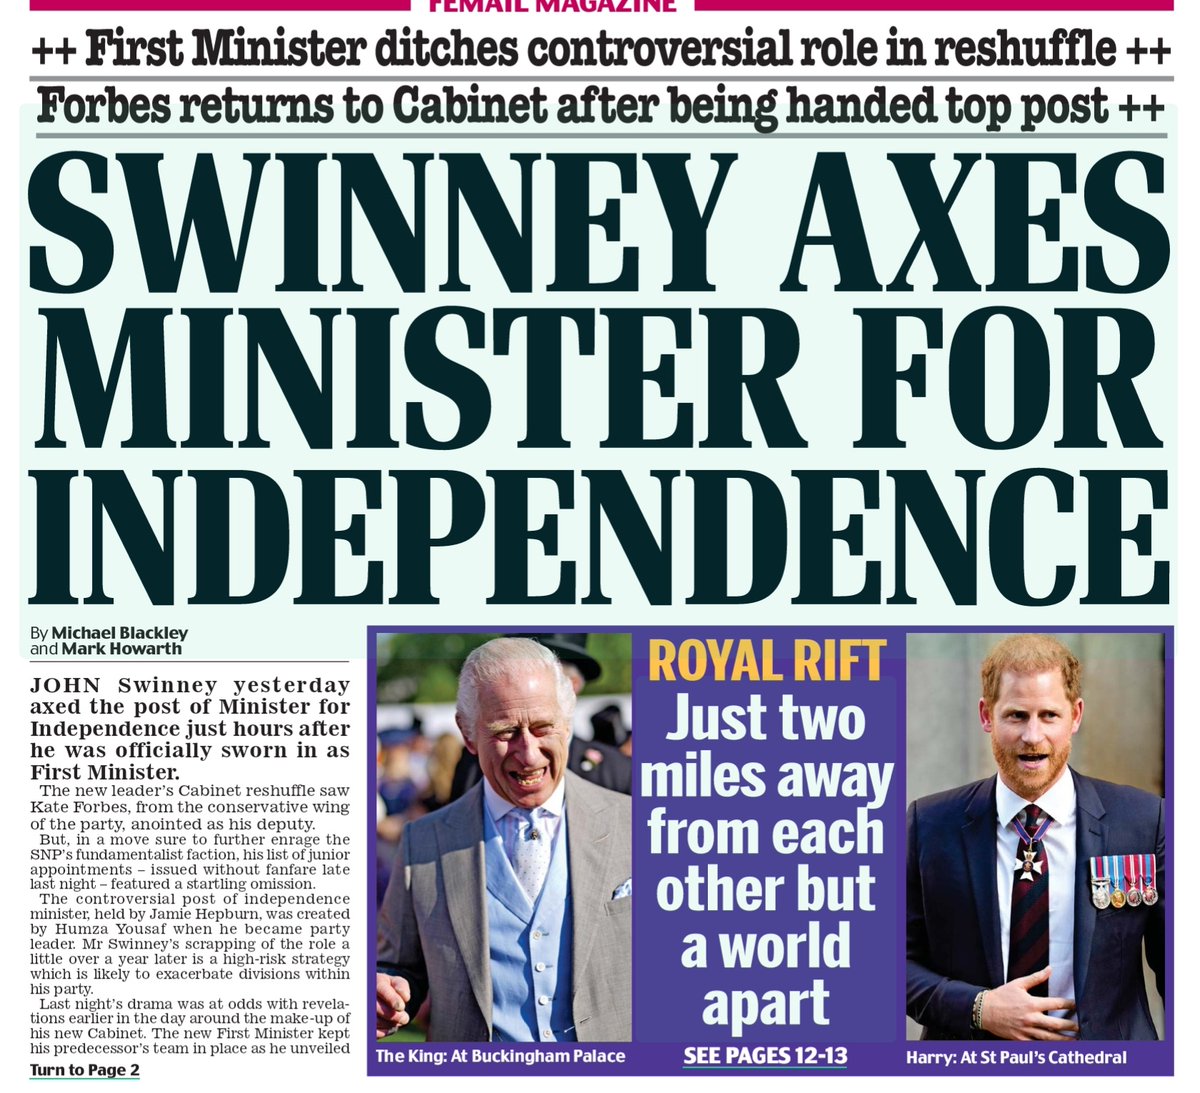 Looks like 'Honest' John Swinney is living up to his name by confirming #ScottishIndependence is dead. Sturgeon killed it. I doubt the rabid seps in the Yes favelas will be happy. Good  #shutdowntheshortbreadsenate